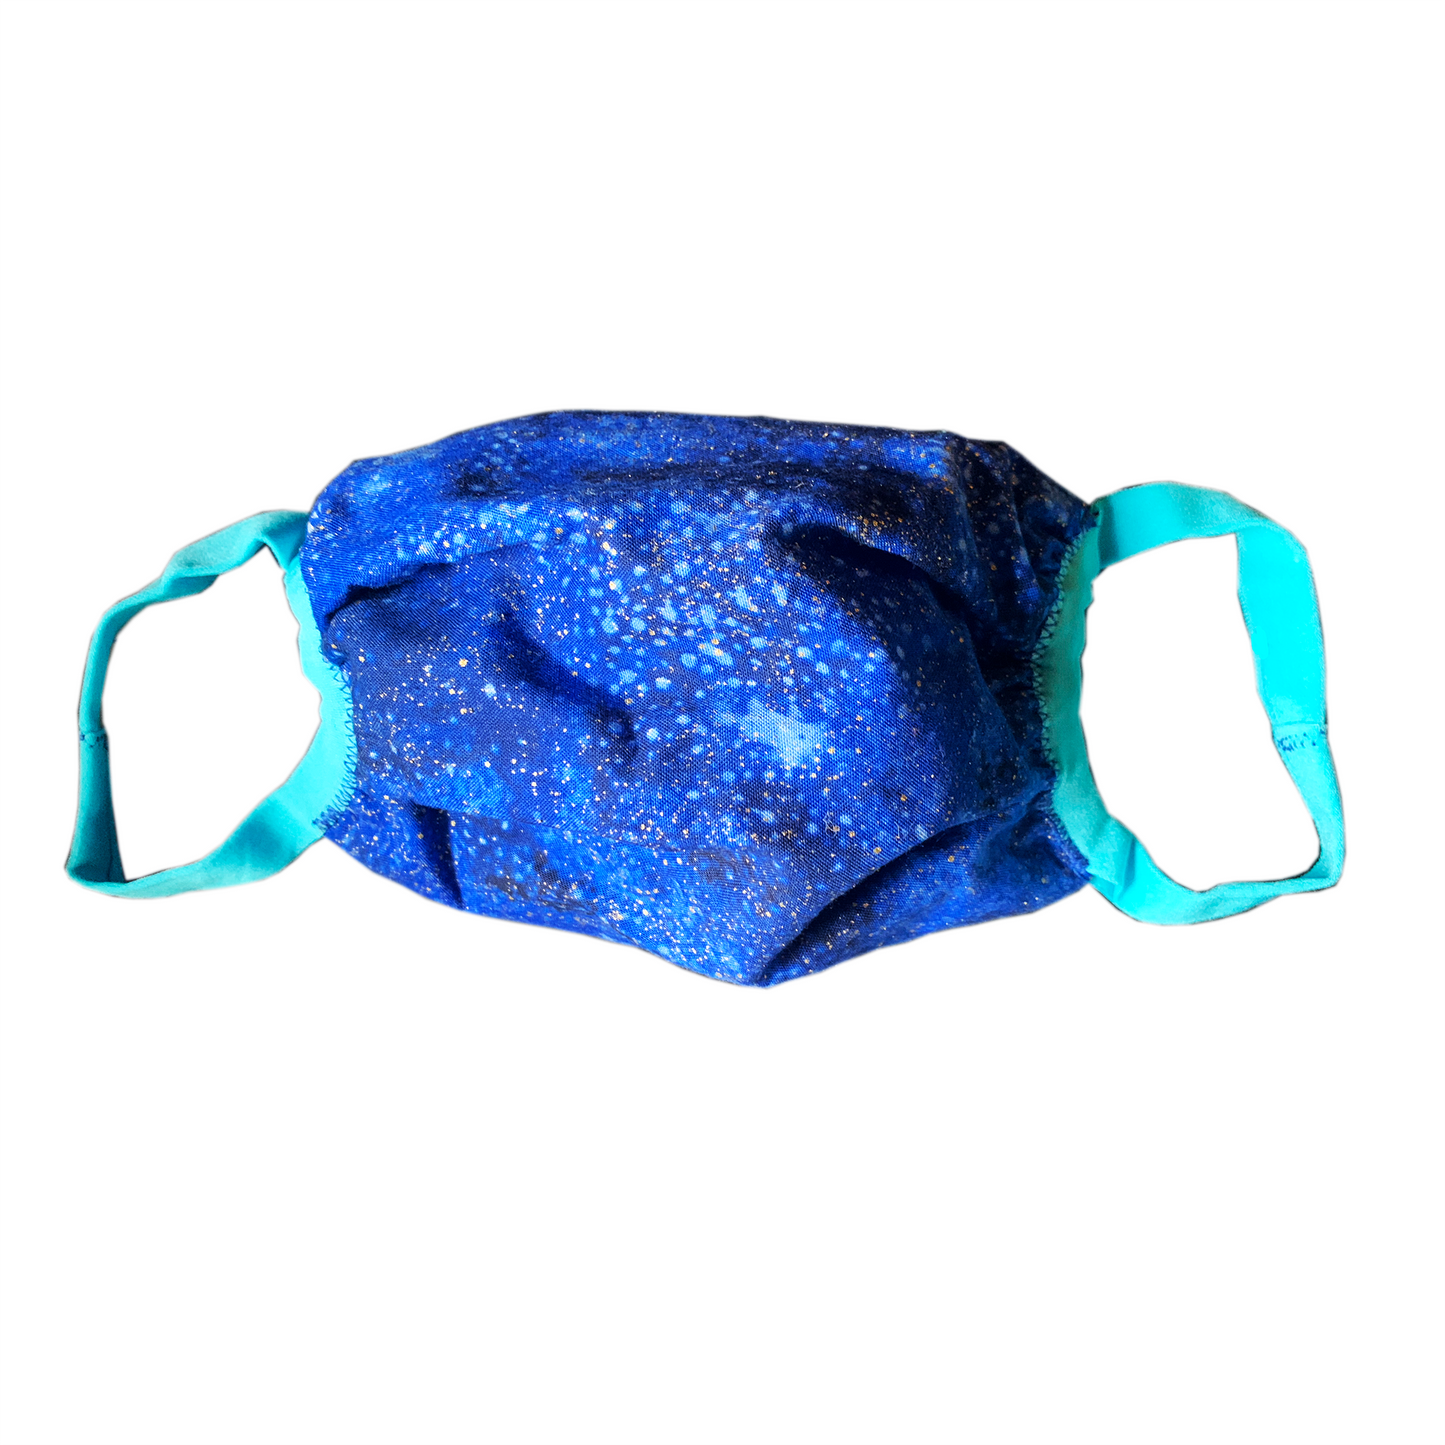 Dark blue galaxy face mask with turquoise ear loops on white background.